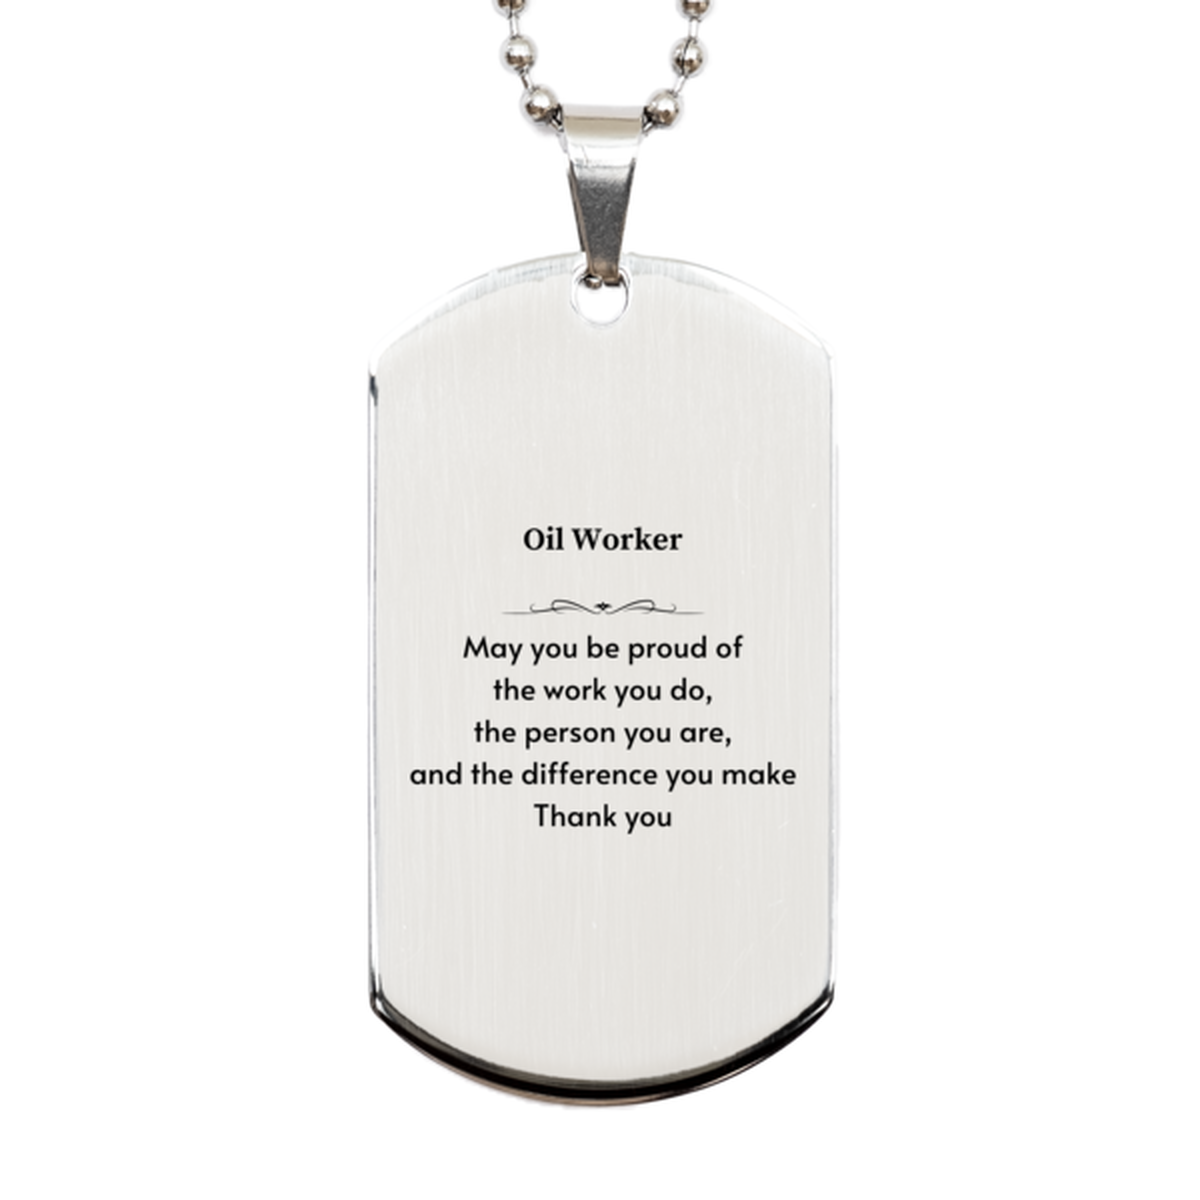 Heartwarming Silver Dog Tag Retirement Coworkers Gifts for Oil Worker, Oil Worker May You be proud of the work you do, the person you are Gifts for Boss Men Women Friends